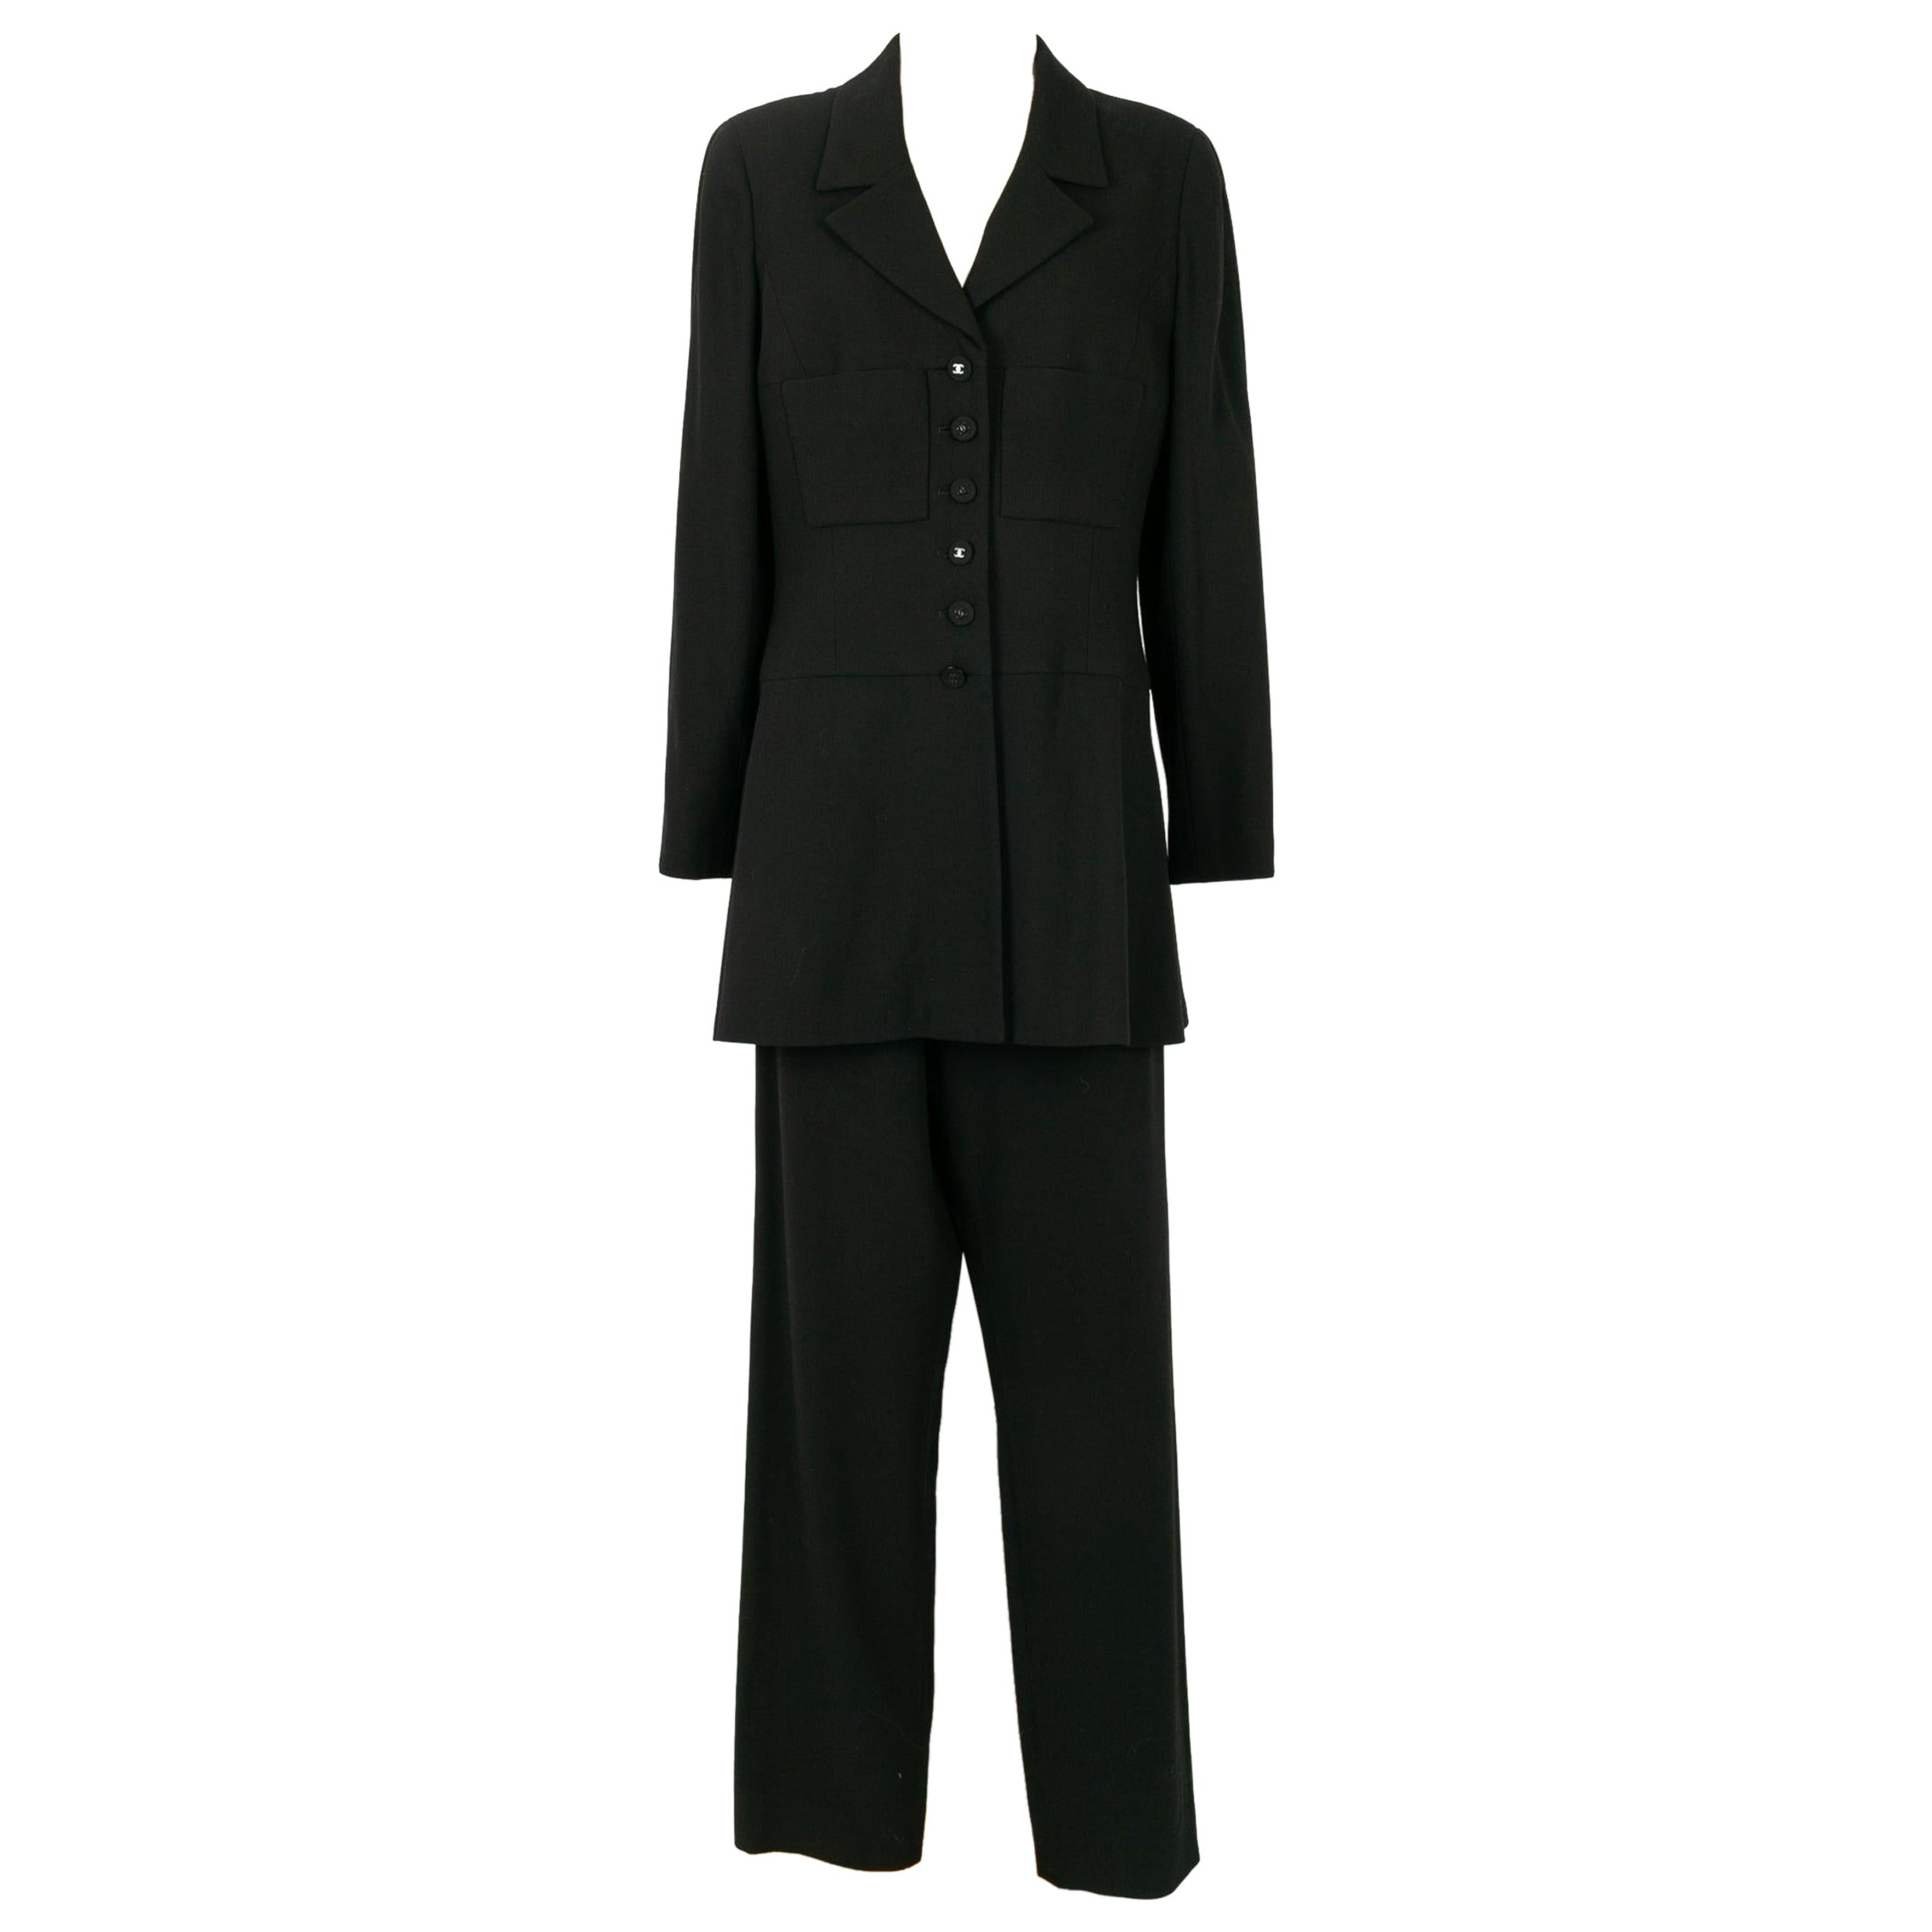 Chanel Suit Set of Jacket and Pants in Black Wool, 1997 For Sale